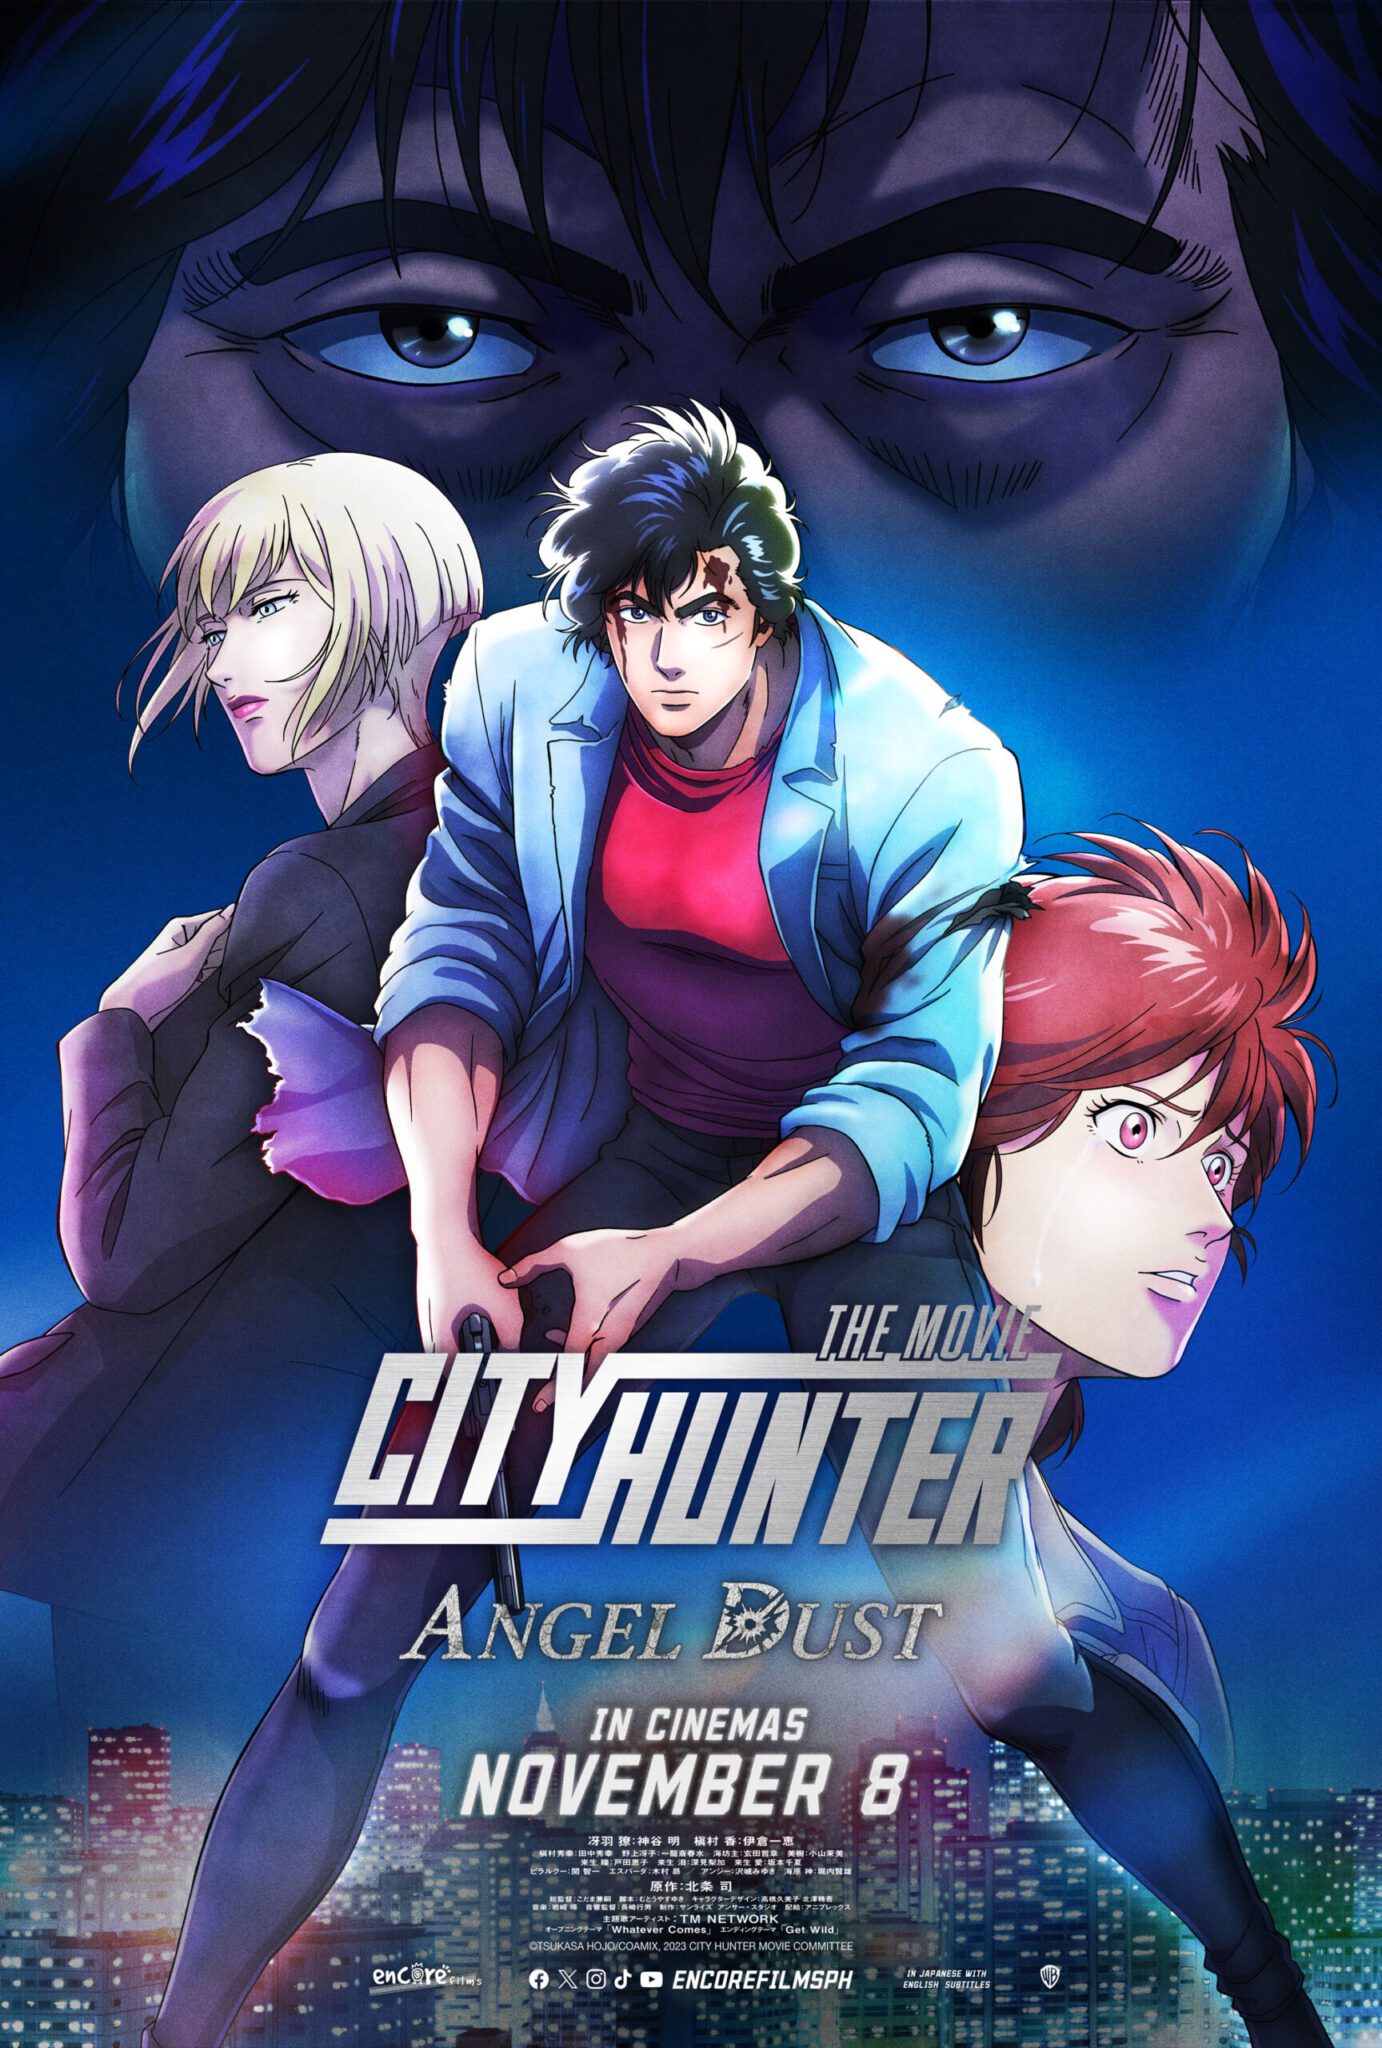 RYO SAEBA’S LATEST EXPLOITS IN ANIME FILM CITY HUNTER THE MOVIE: ANGEL DUST Exclusive at SM Cinemas on November 8